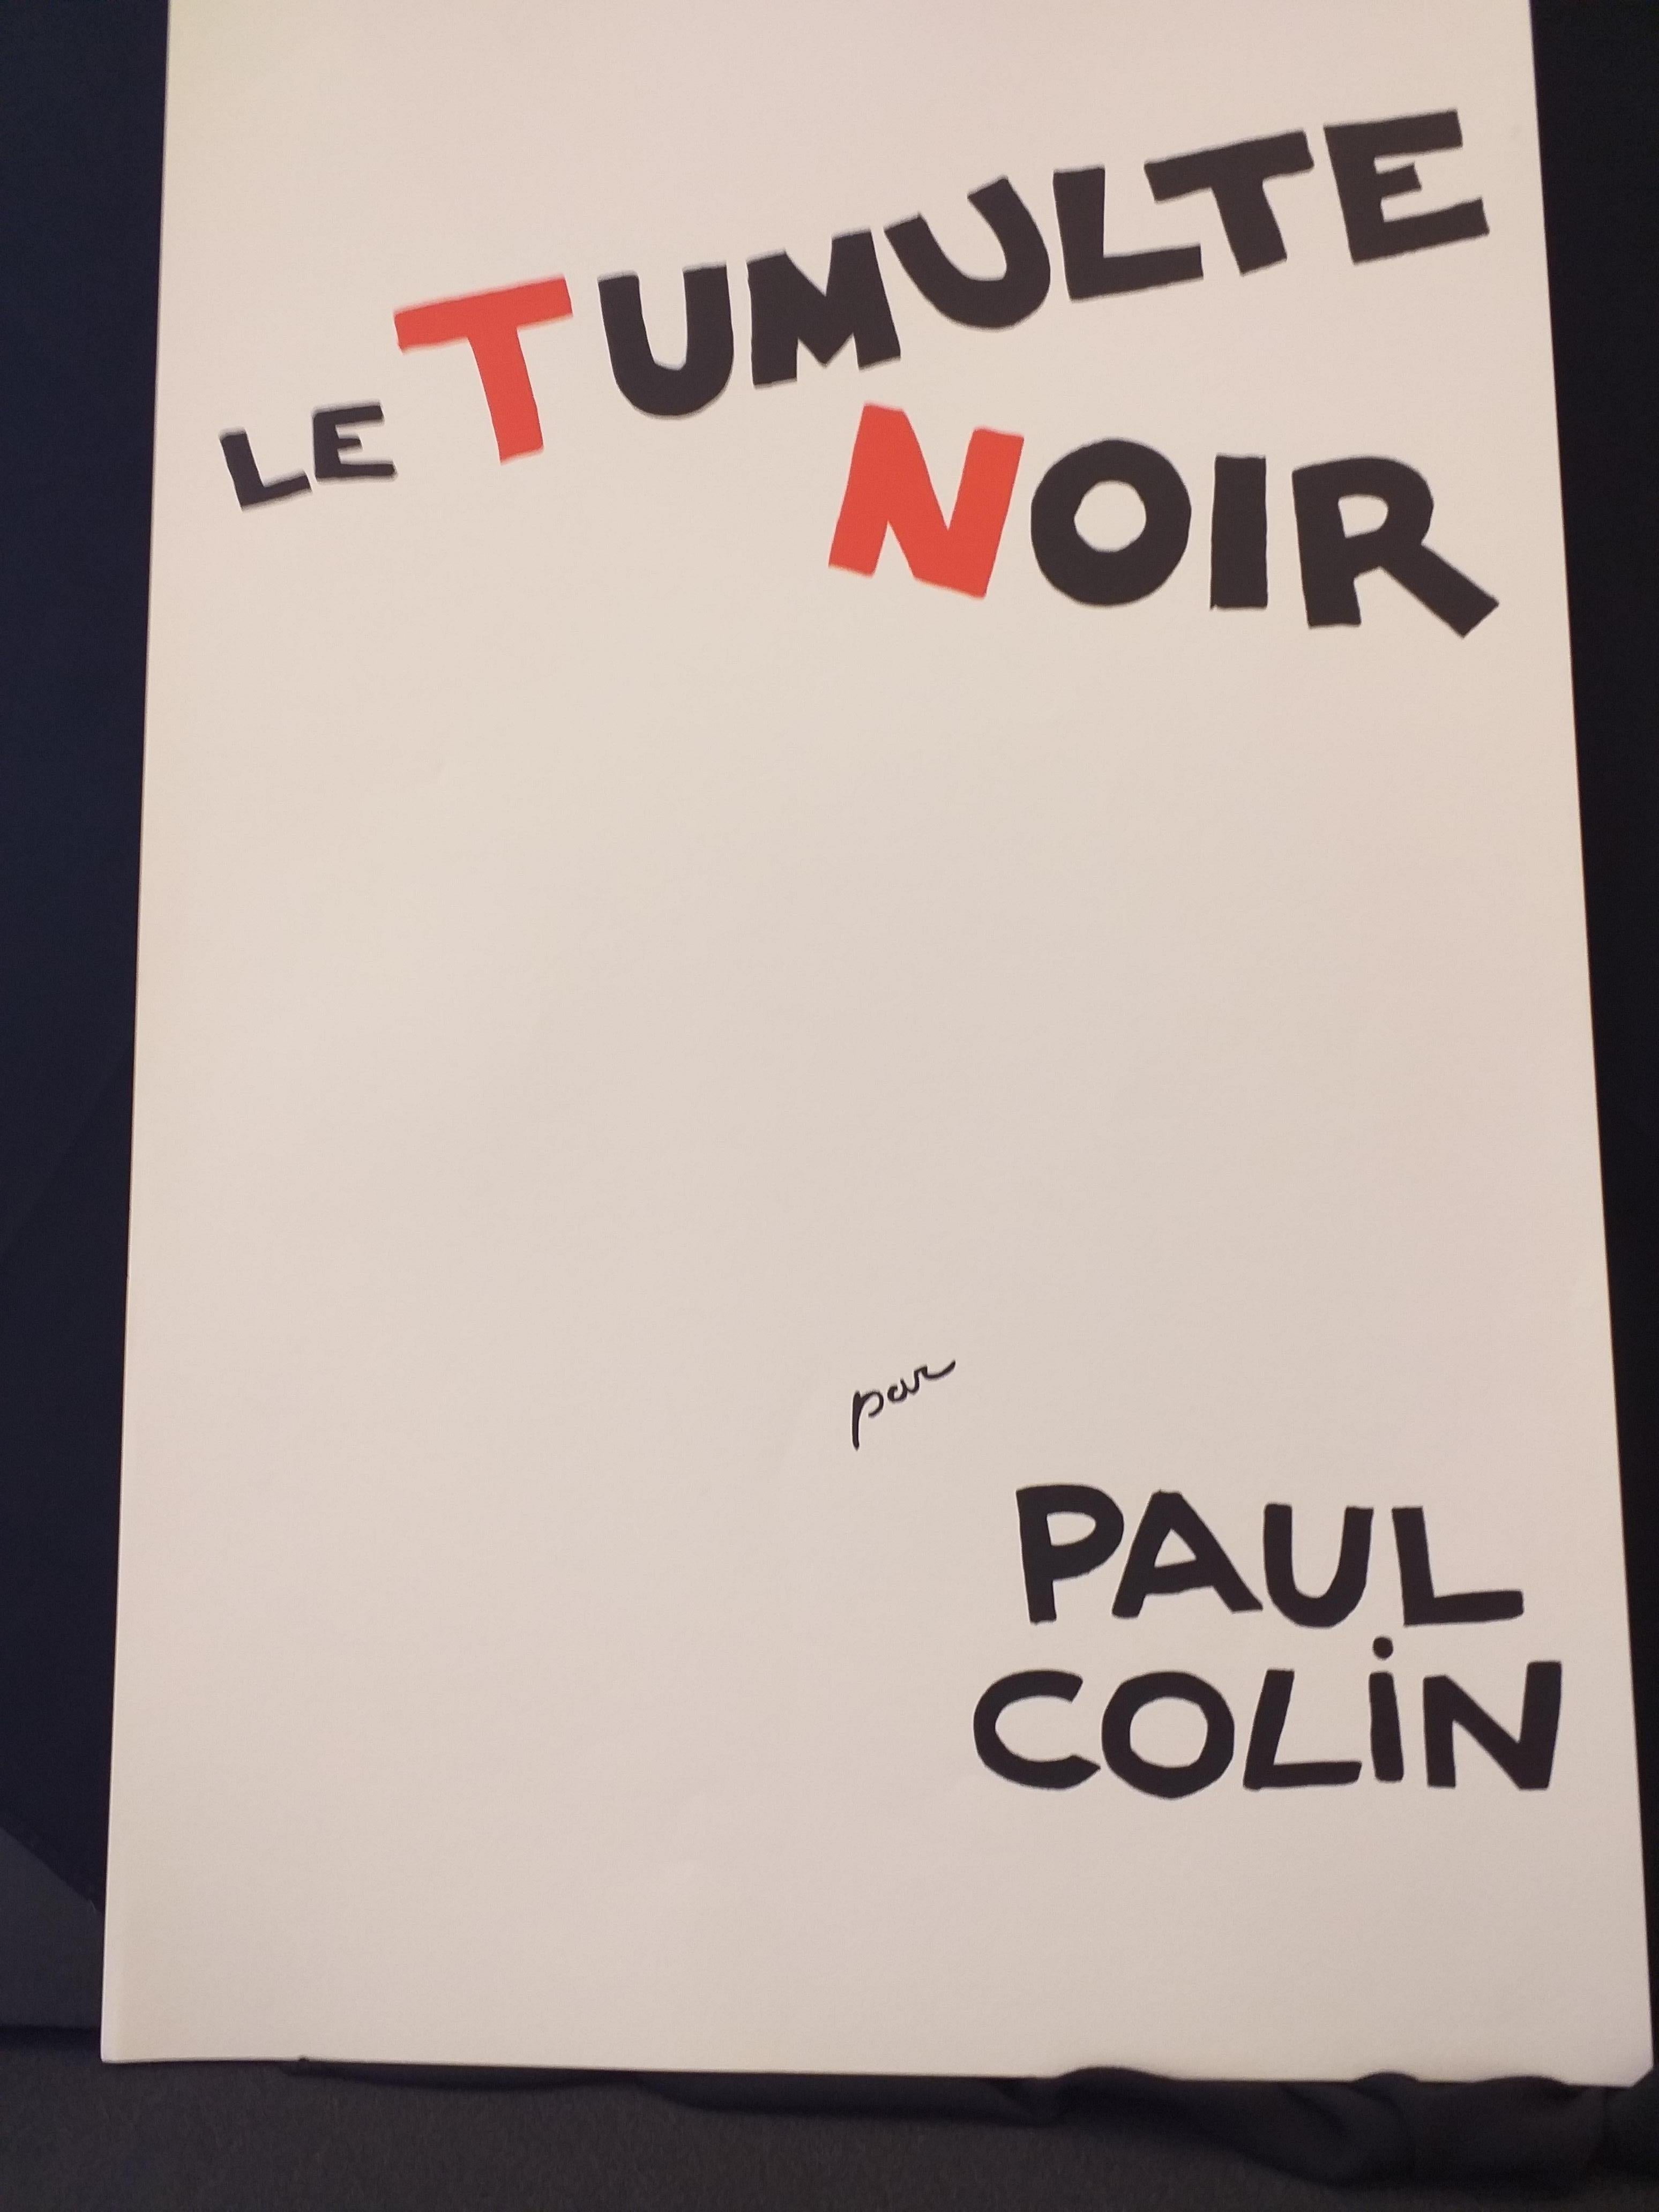 PAUL COLIN Poster artist
1892 - 1985
When the young Afro-American music-hall dancer Josephine Baker and the poster artist Paul Colin met during the rehearsals of the Revue Nègre
in Paris in 1925, both were still unknown to the general public. No